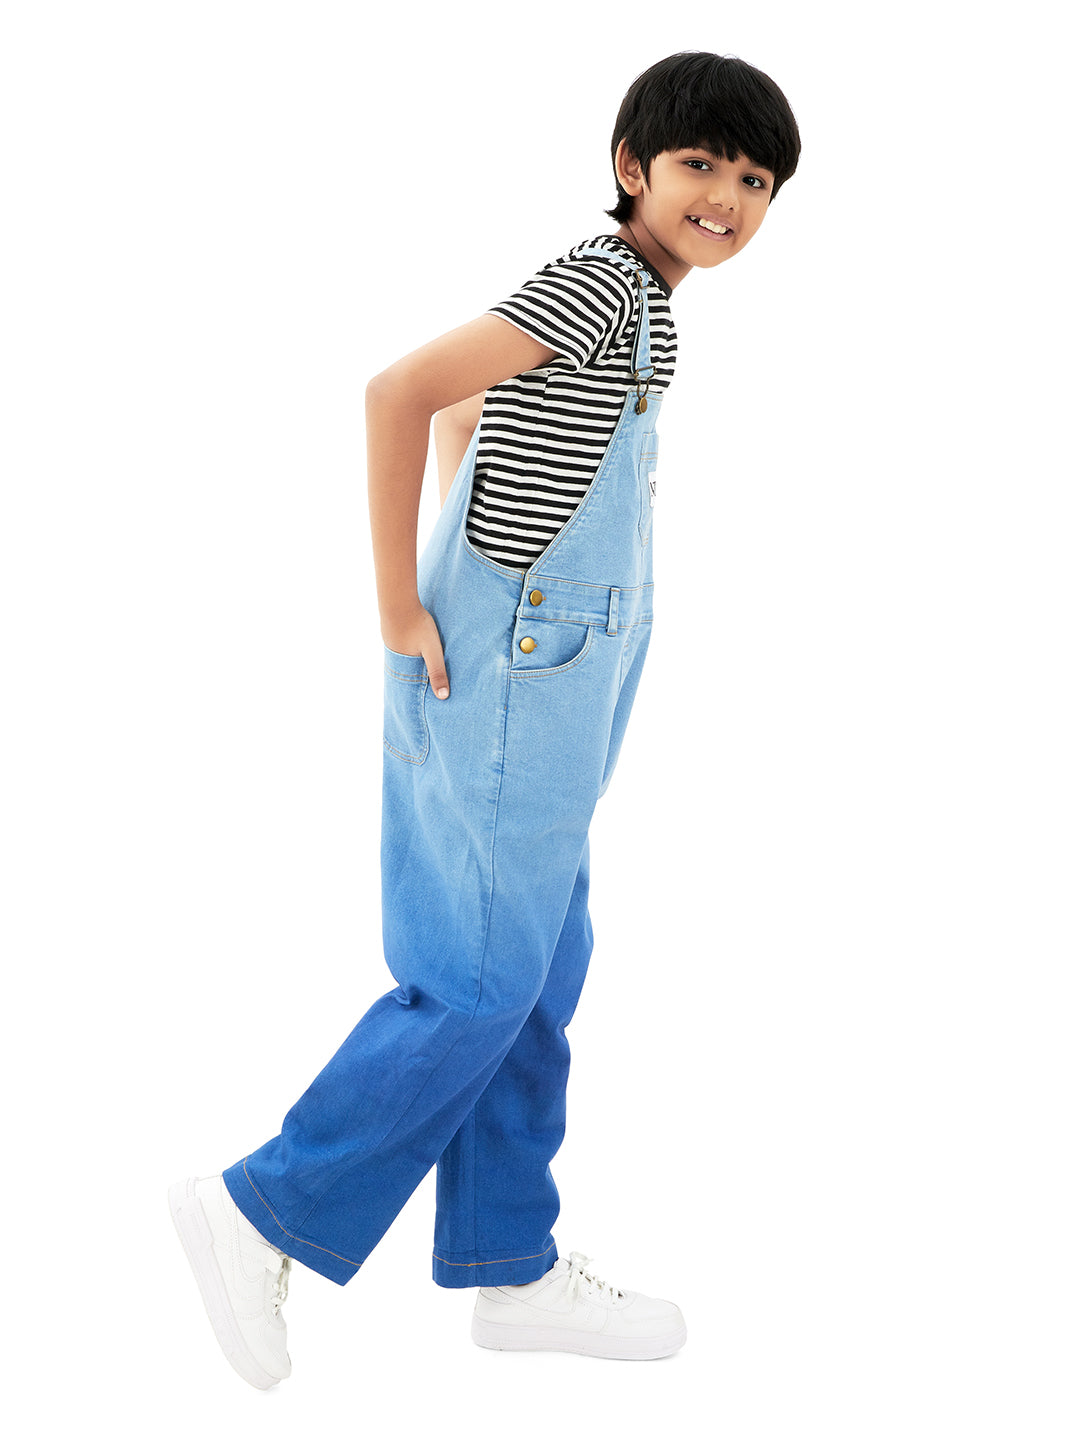 Naughty Dungaree® Full Length Ombre Bio Washed Cotton Denim Dungaree - Boys